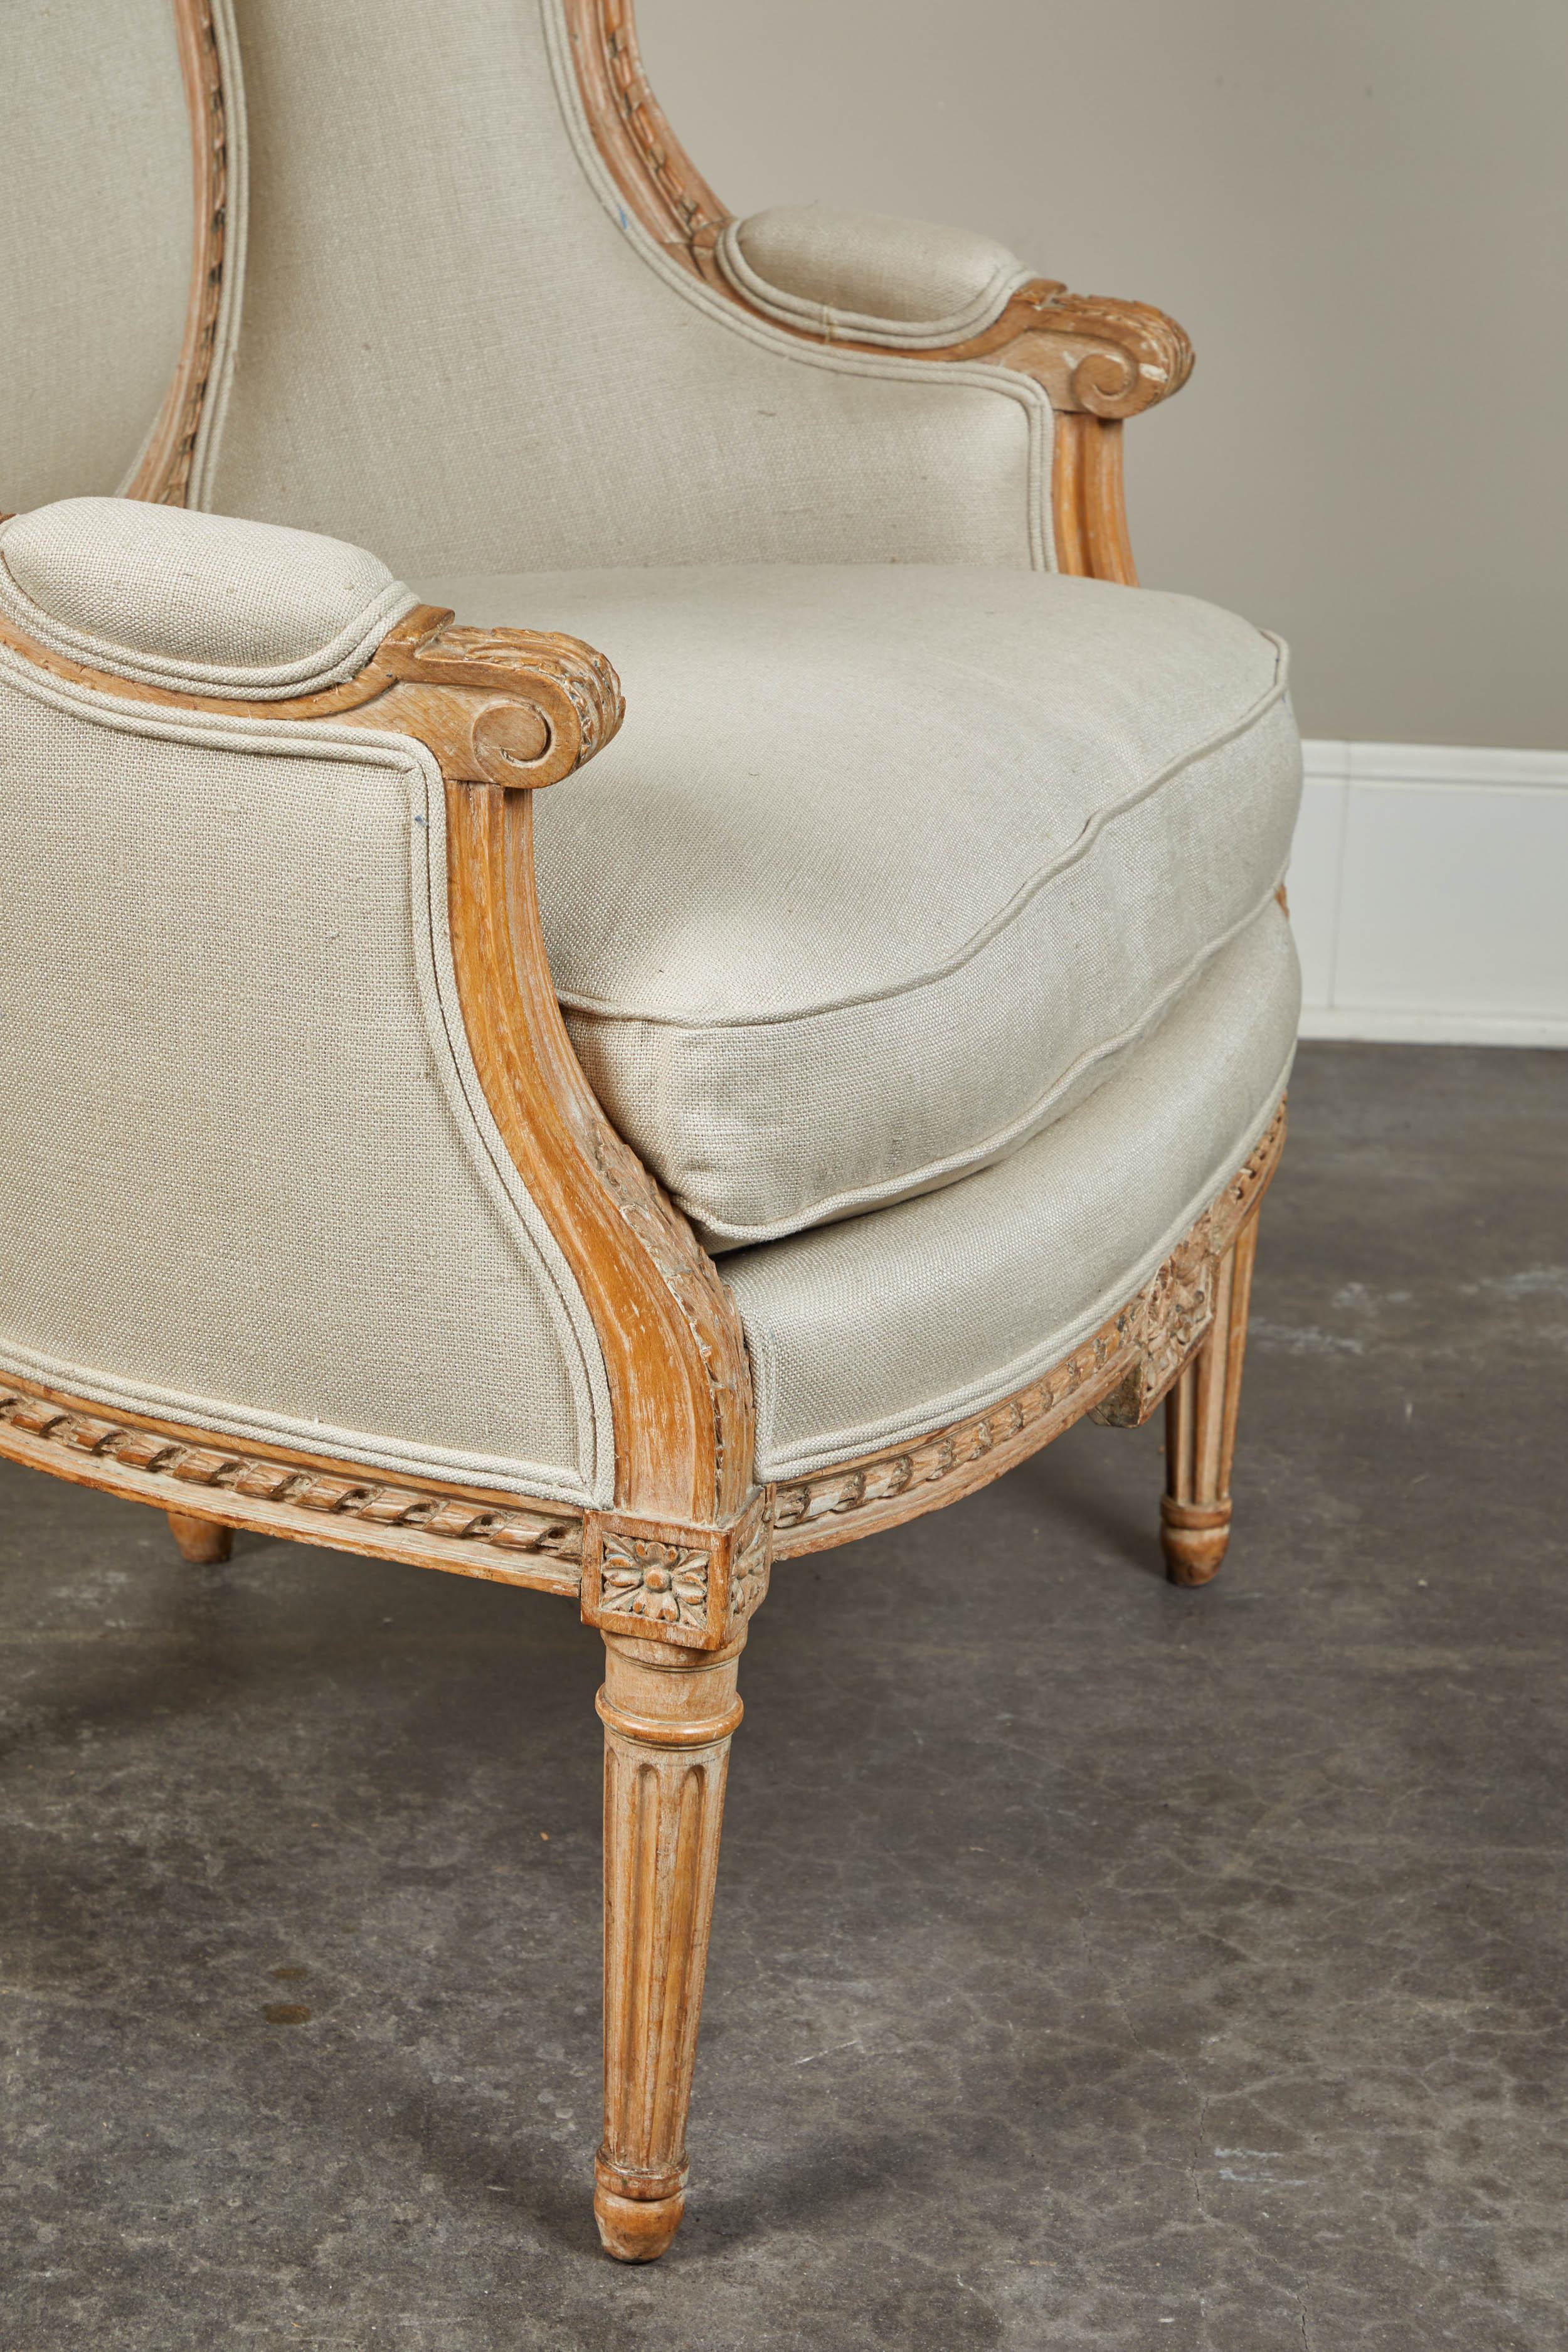 19th Century French Carved Chair with Beige Upholstery For Sale 4